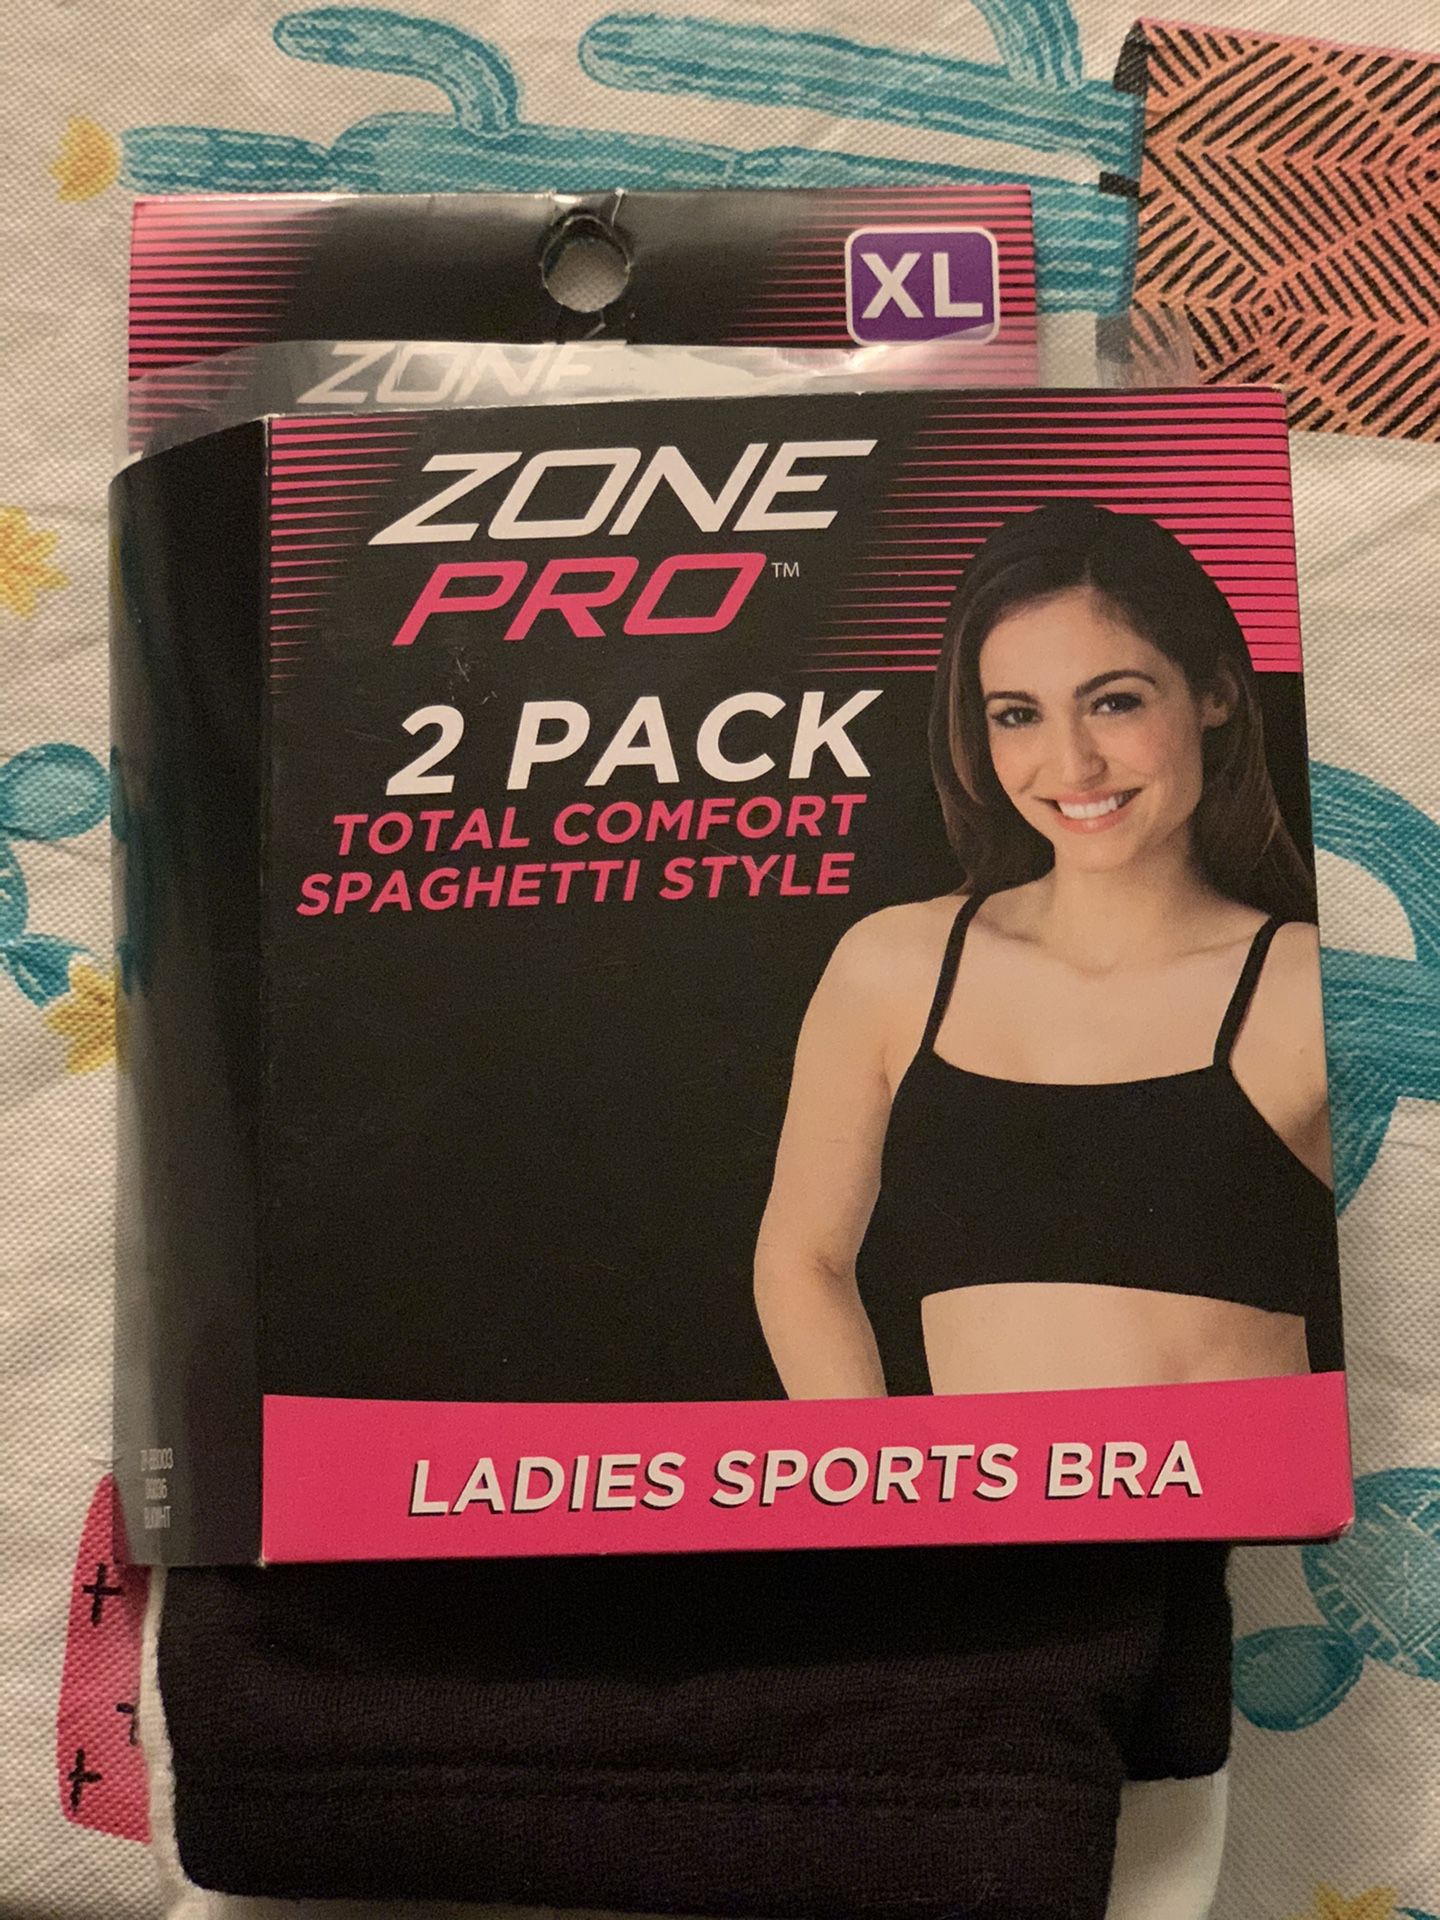 2 Set pack bra Ladies sports Bra size XL for Sale in Noblesville